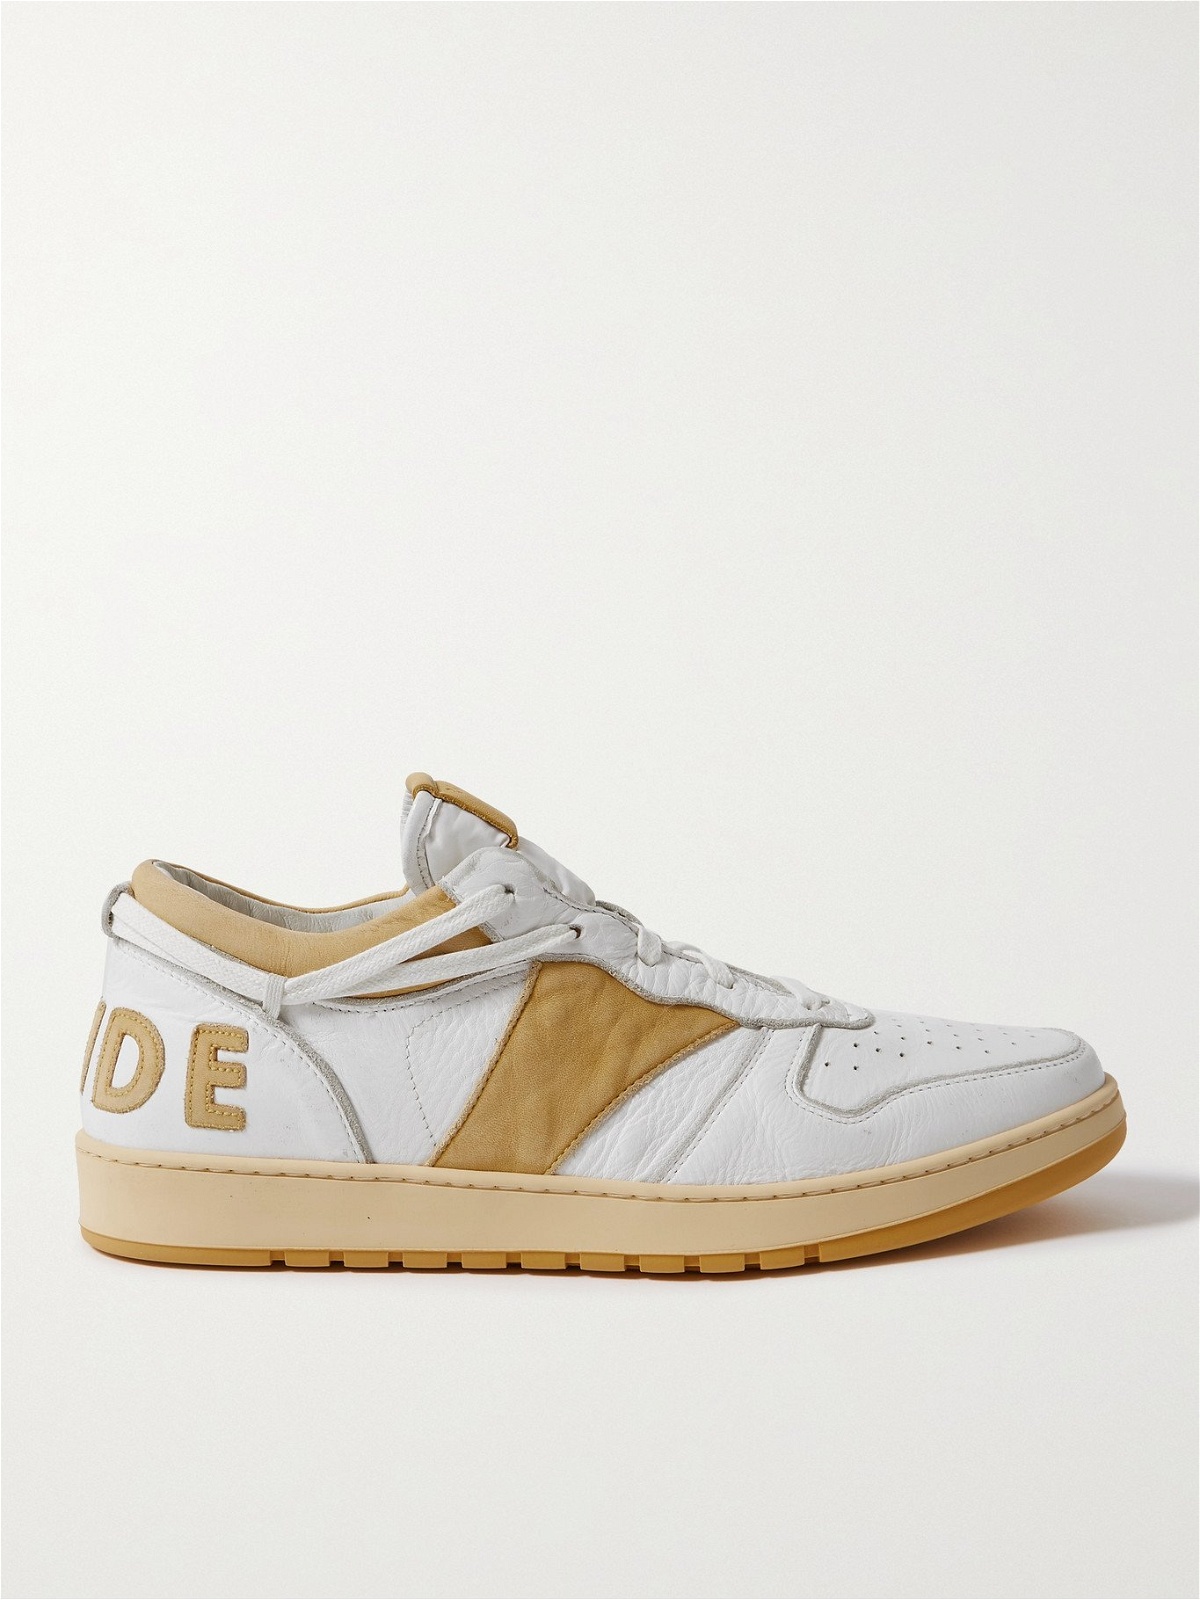 RHUDE - Rhecess Distressed Leather Sneakers - Yellow - 9 Rhude